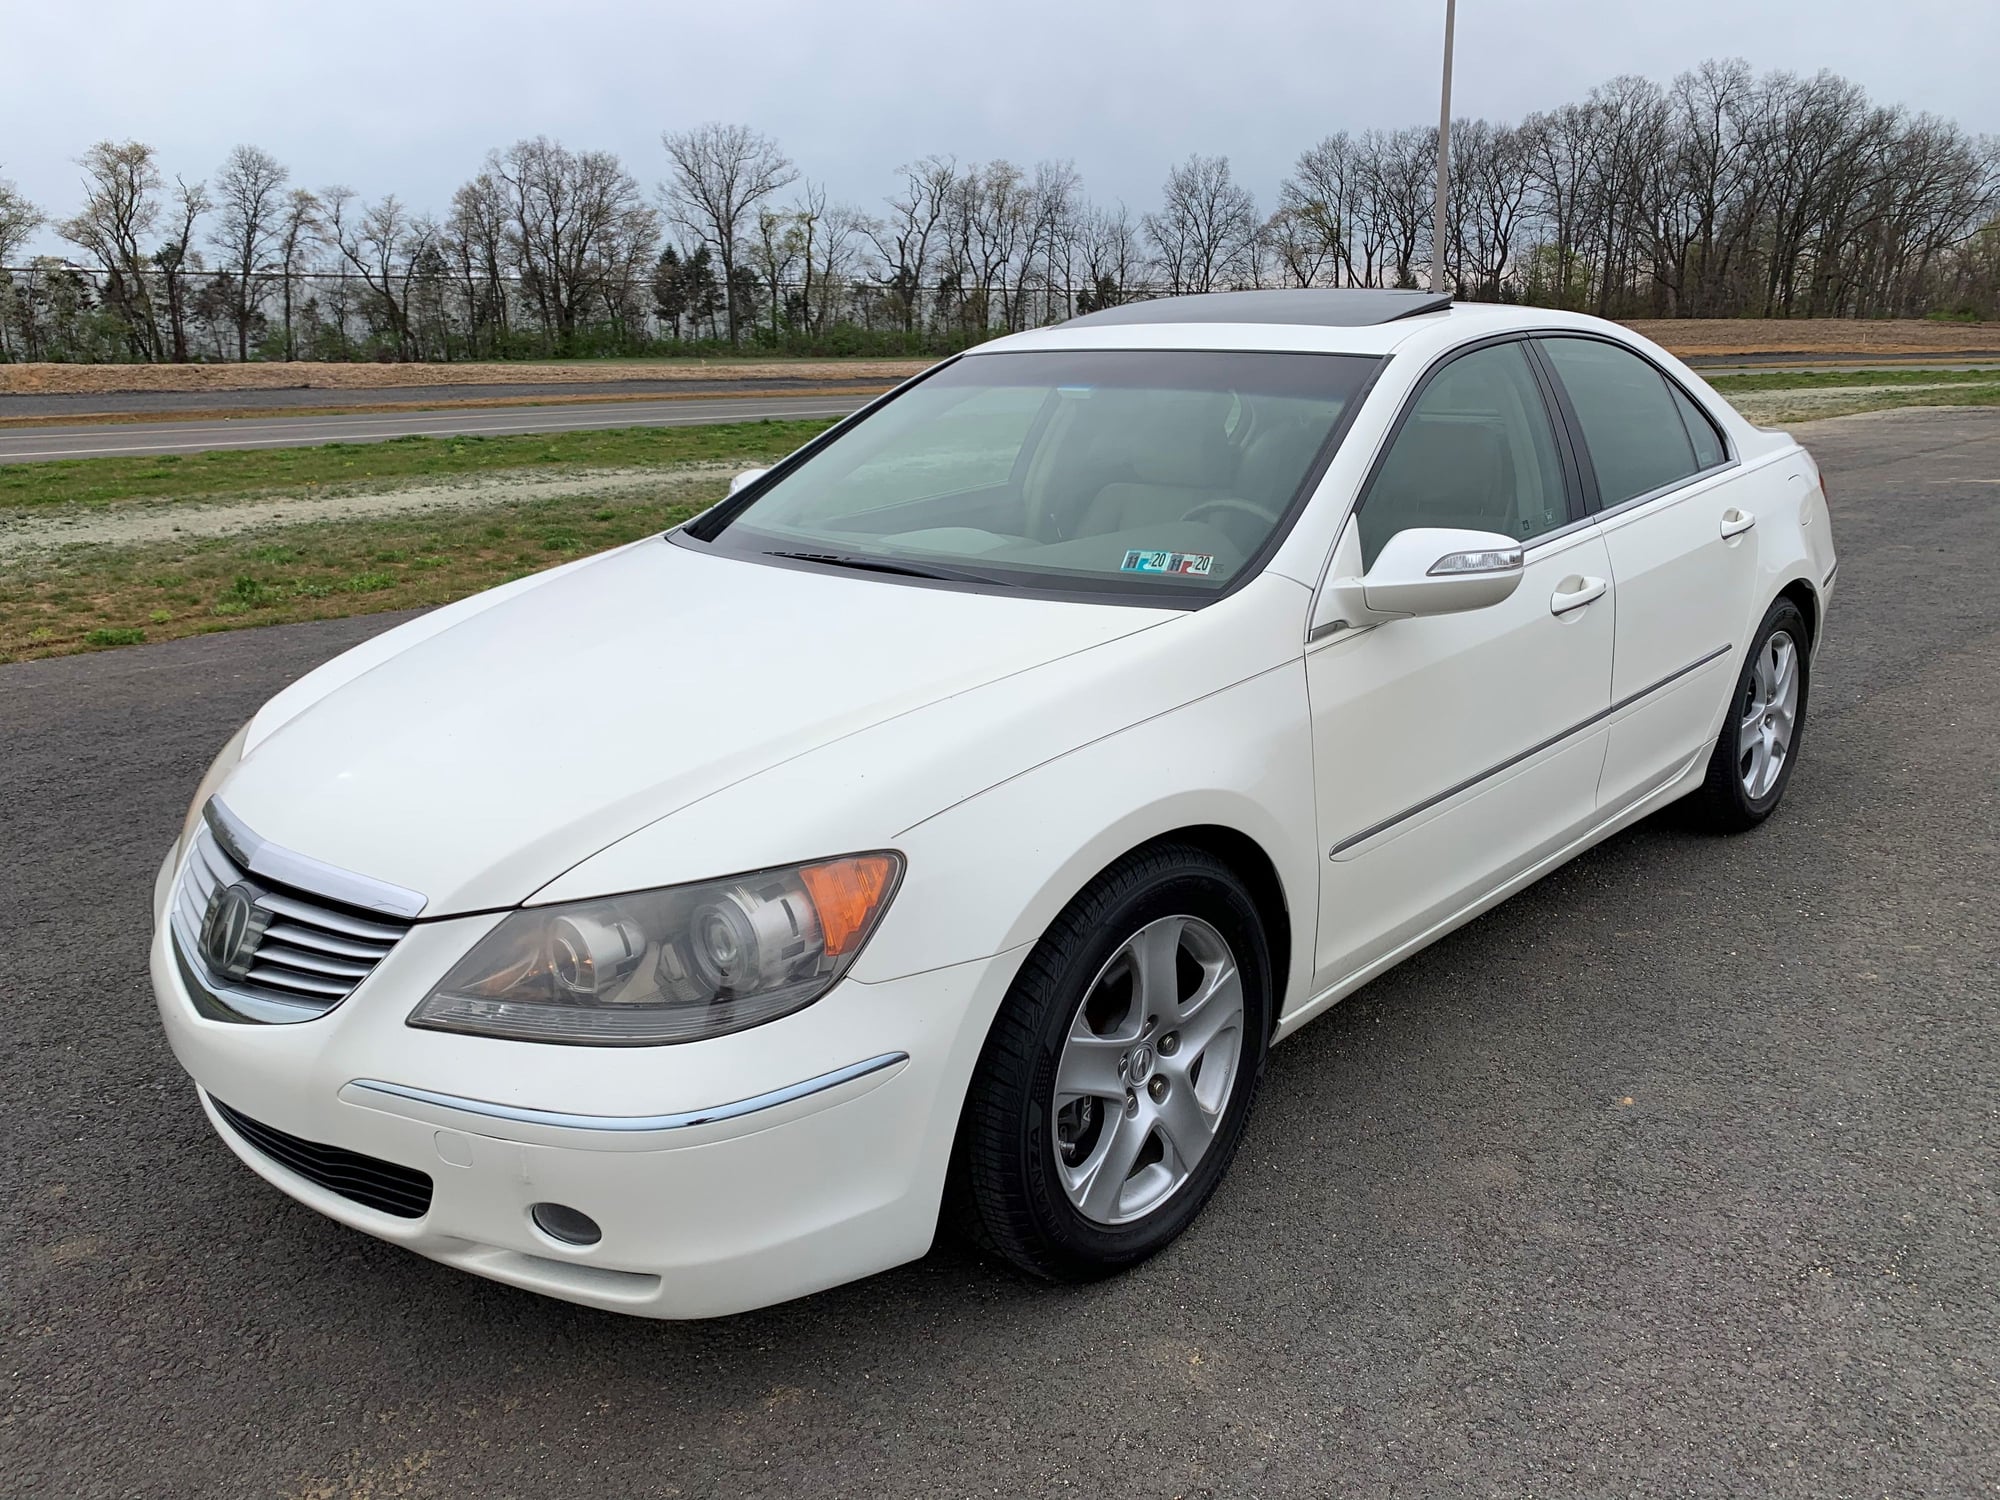 2006 Acura RL - FS: 2006 Acura RL Technology For Sale (Eastern, Pennsylvania) - Used - VIN JH4KB16586C005819 - 189,000 Miles - 6 cyl - AWD - Automatic - Sedan - White - Orefield, PA 18069, United States